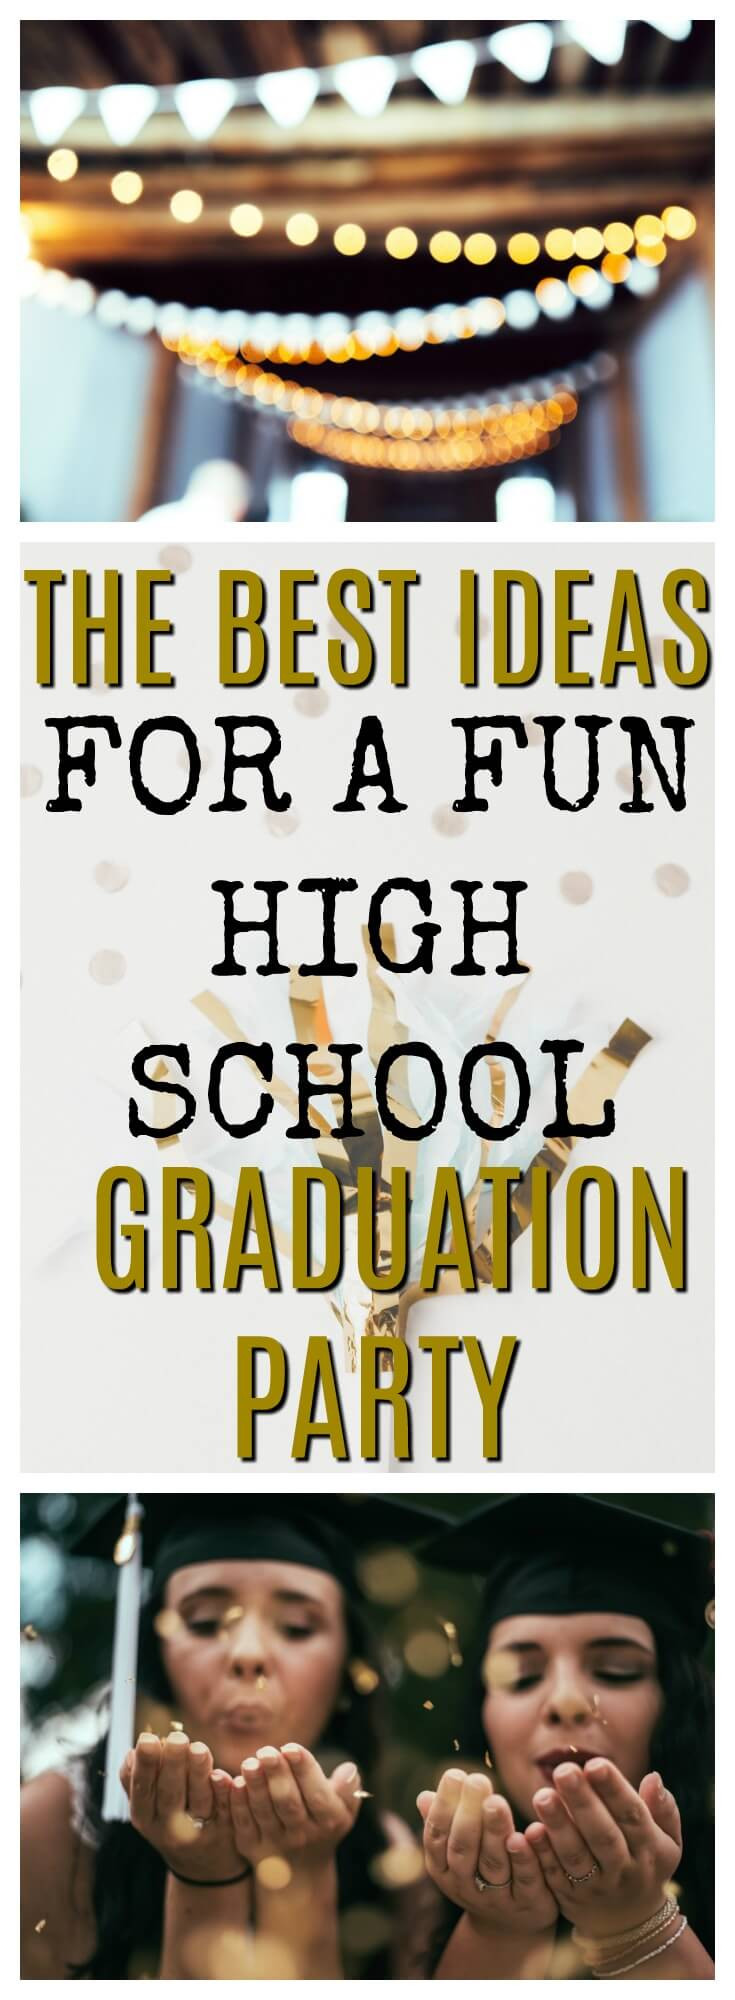 Fun Ideas For Graduation Party
 Graduation Party Ideas 2019 How to Celebrate [step by step]